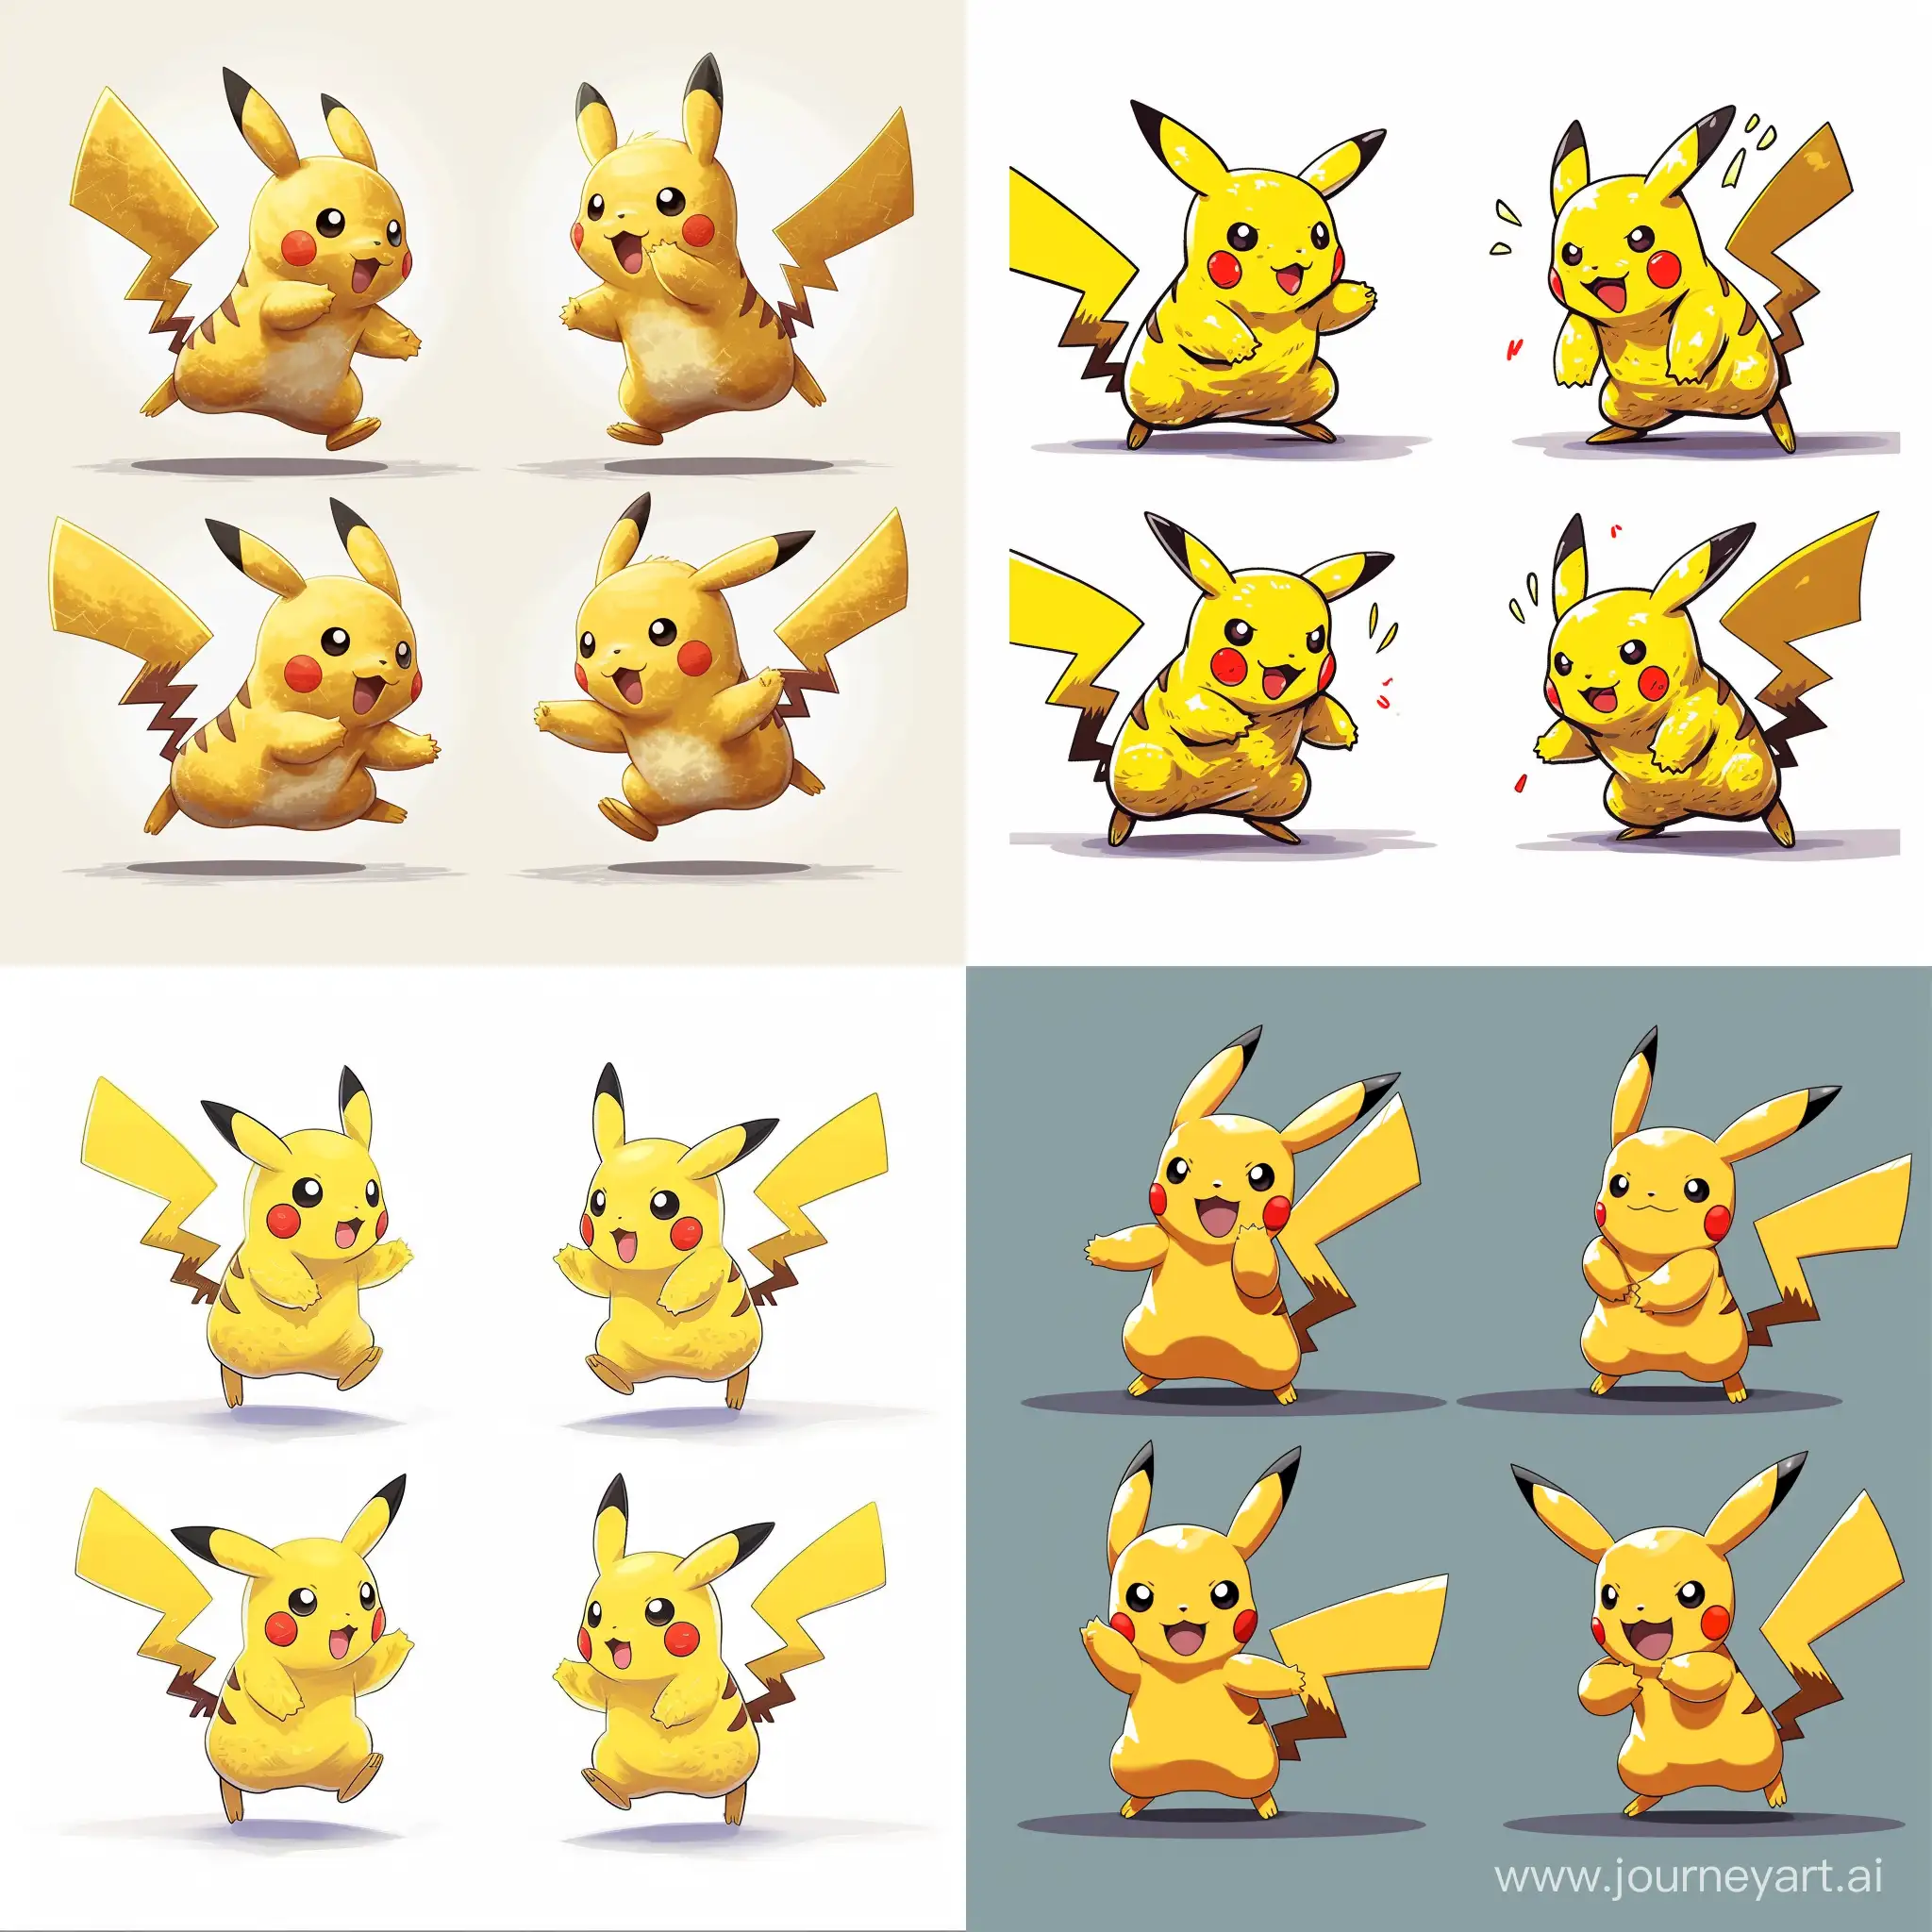 TibiaInspired-Pikachu-Sprites-in-Four-Directions-with-Dynamic-Movements